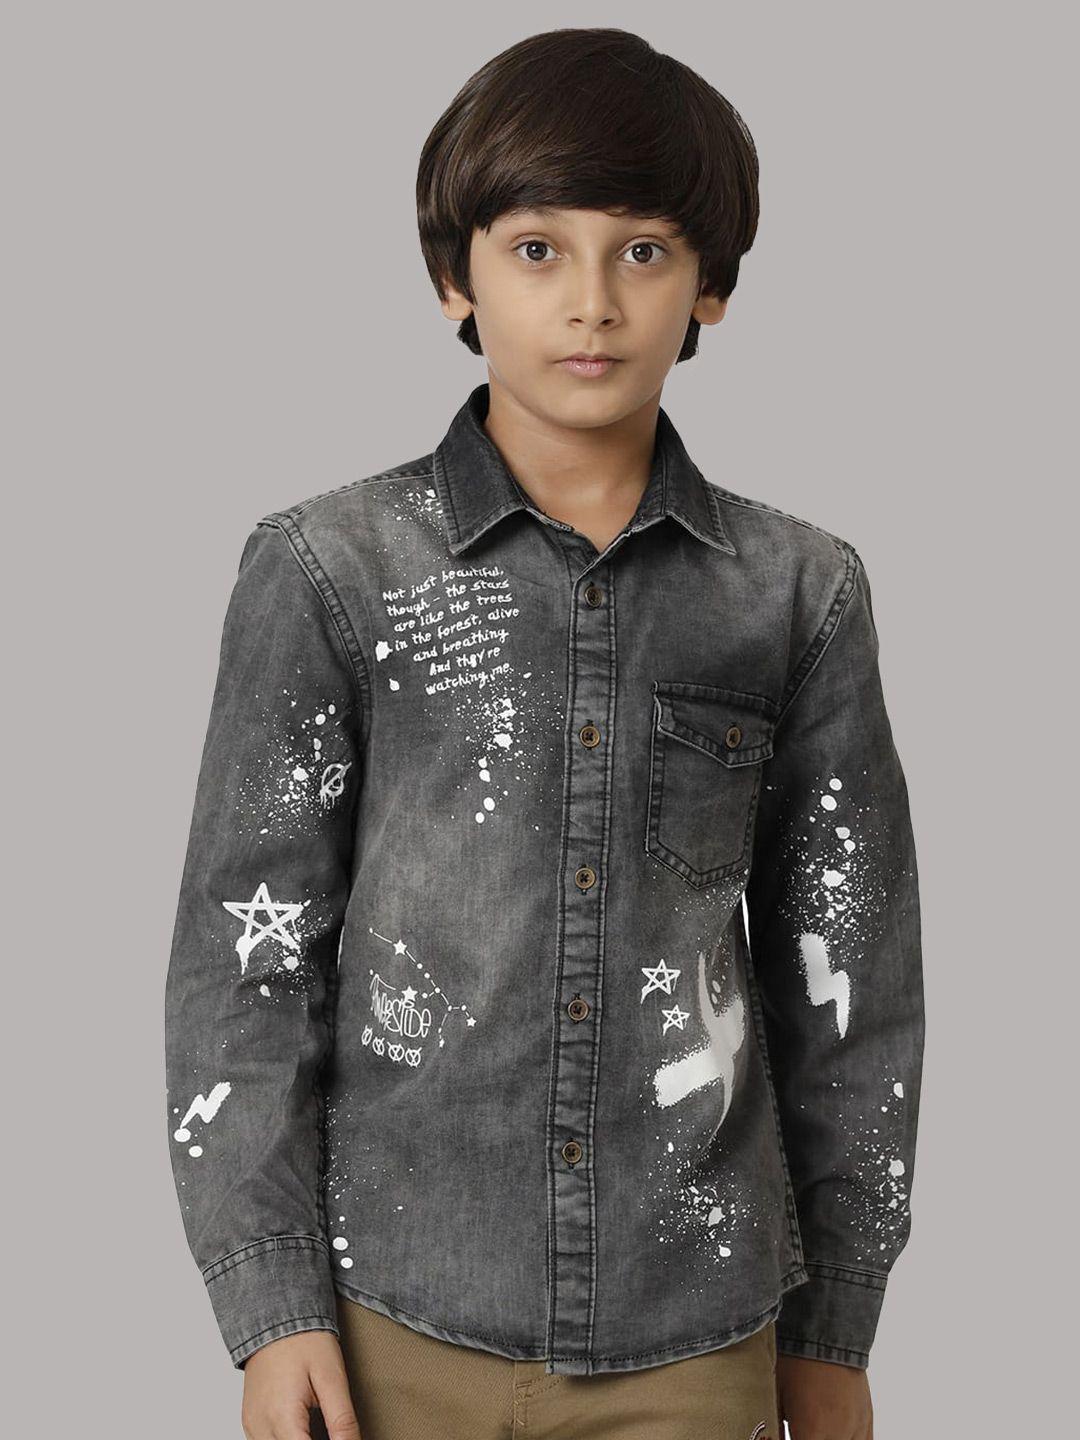 under fourteen only boys typography printed casual denim shirt